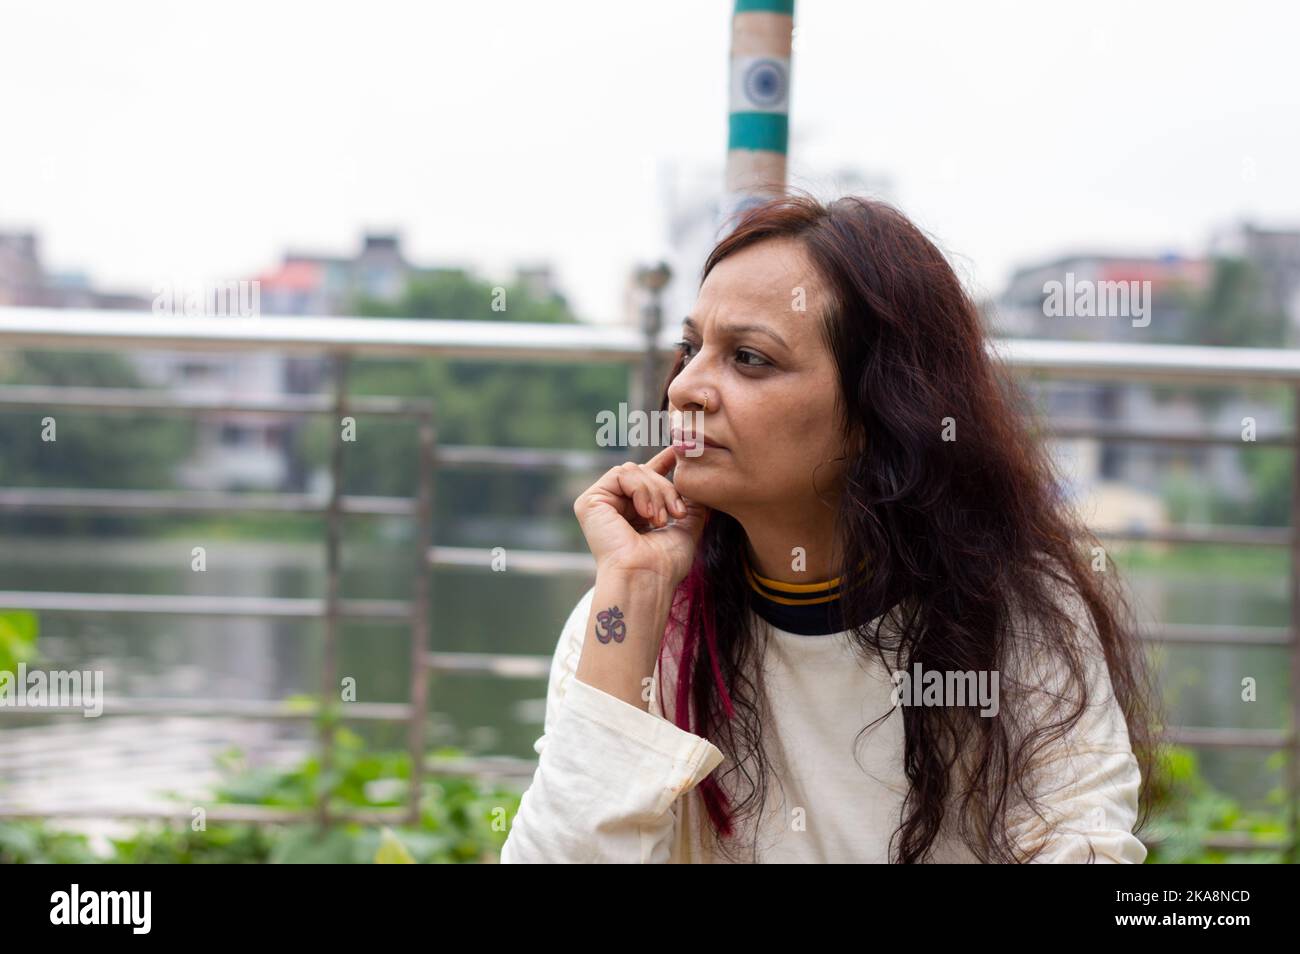 Mid Adult worried Woman sitting on hand on chin pose in a park bench and looking at a distance. Front view. Indian Ethnicity Age 50 to 54 Years. Stock Photo